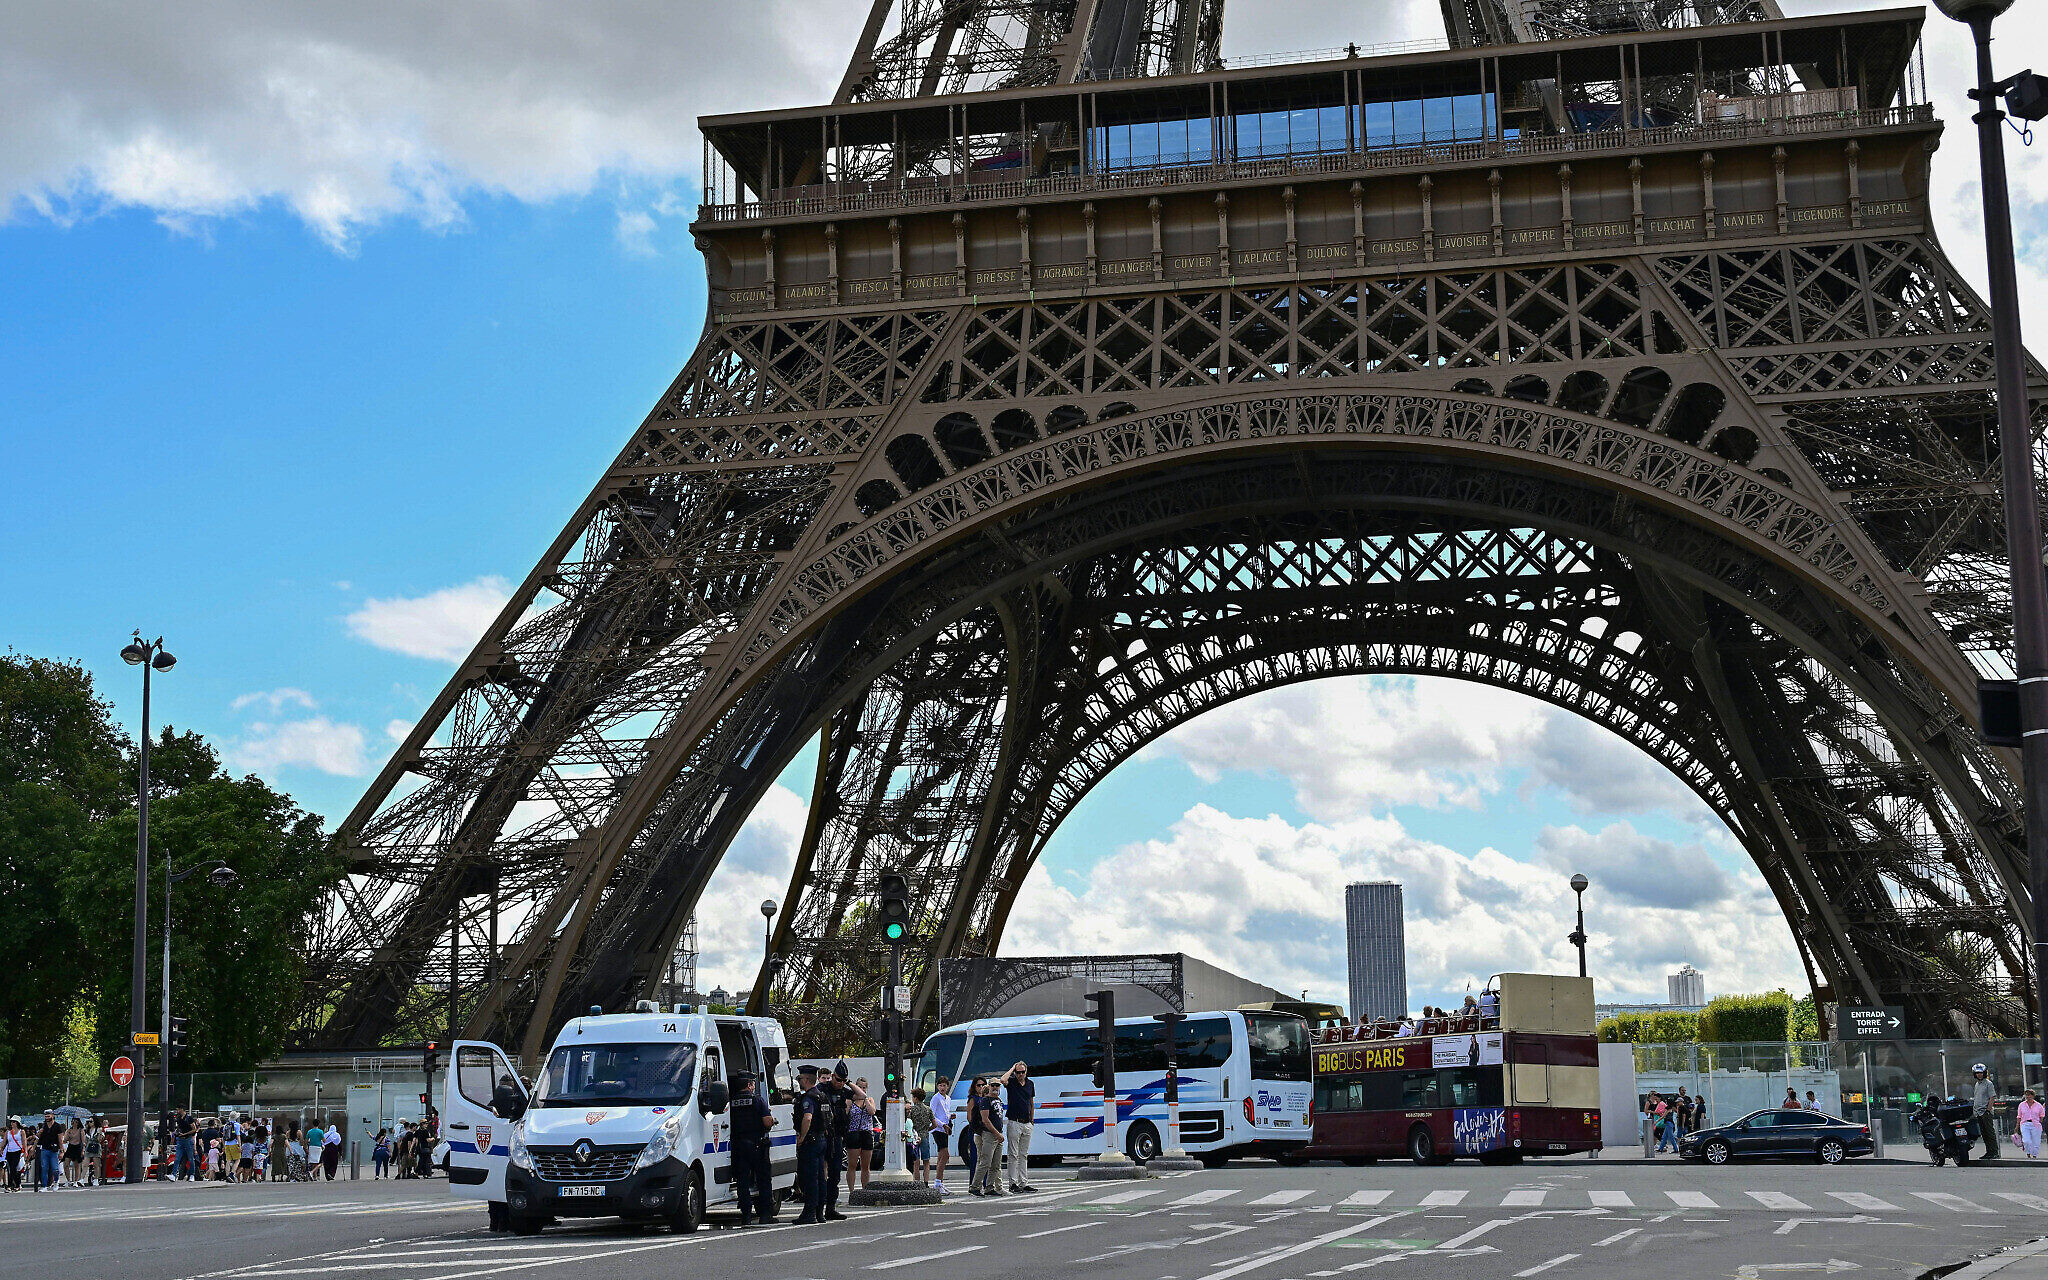 False alarm' prompts brief Eiffel Tower evacuation; bomb squads search site  | The Times of Israel